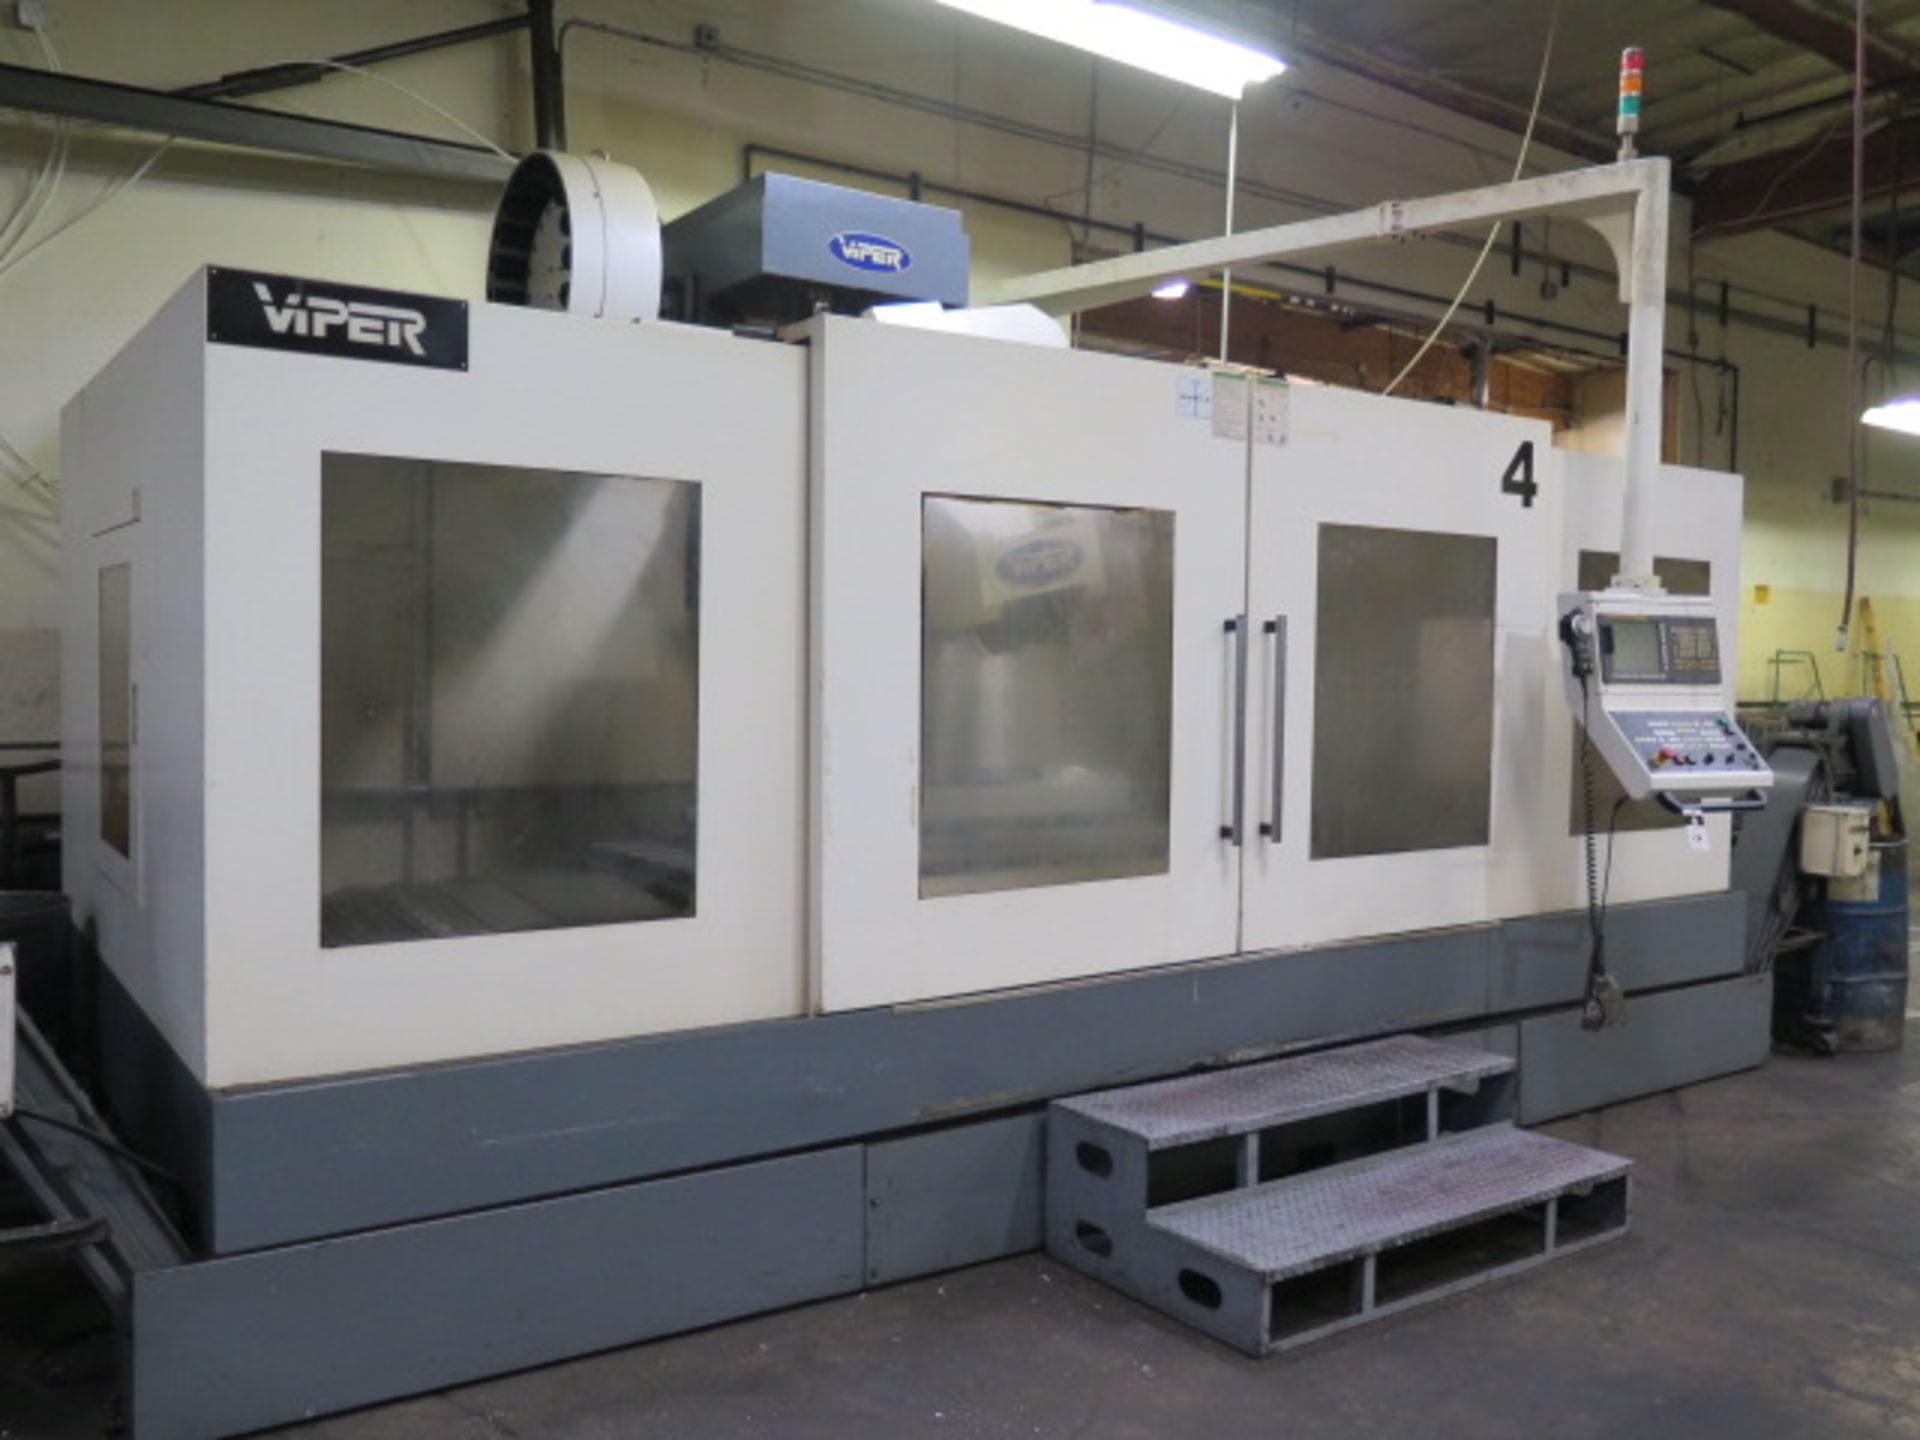 2010 Mighty Viper VMC-2100 5AB True 5-Axis CNC VMC, s/n 011795 w/ Fanuc 30i MODEL A, SOLD AS IS - Image 2 of 26